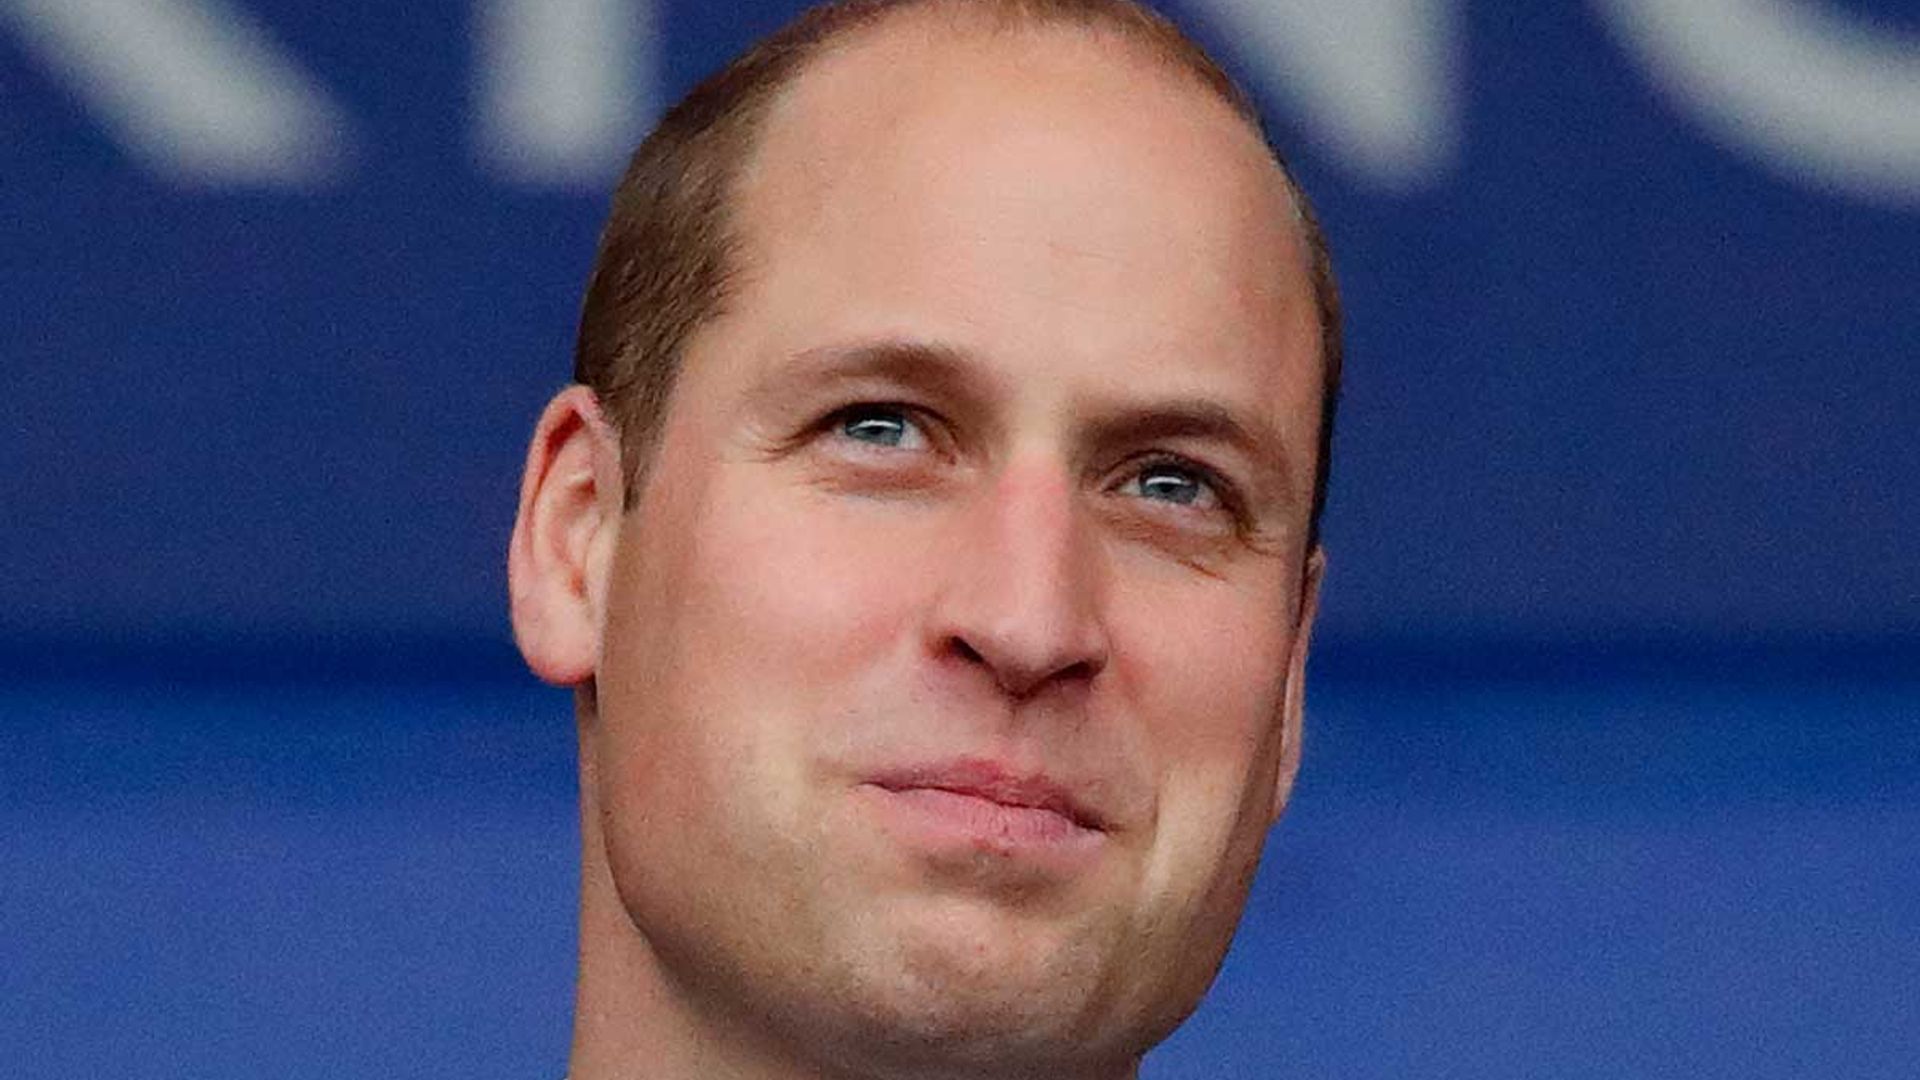 Prince William sparks online frenzy with surprise TikTok debut ahead of Earthshot Prize awards ceremony